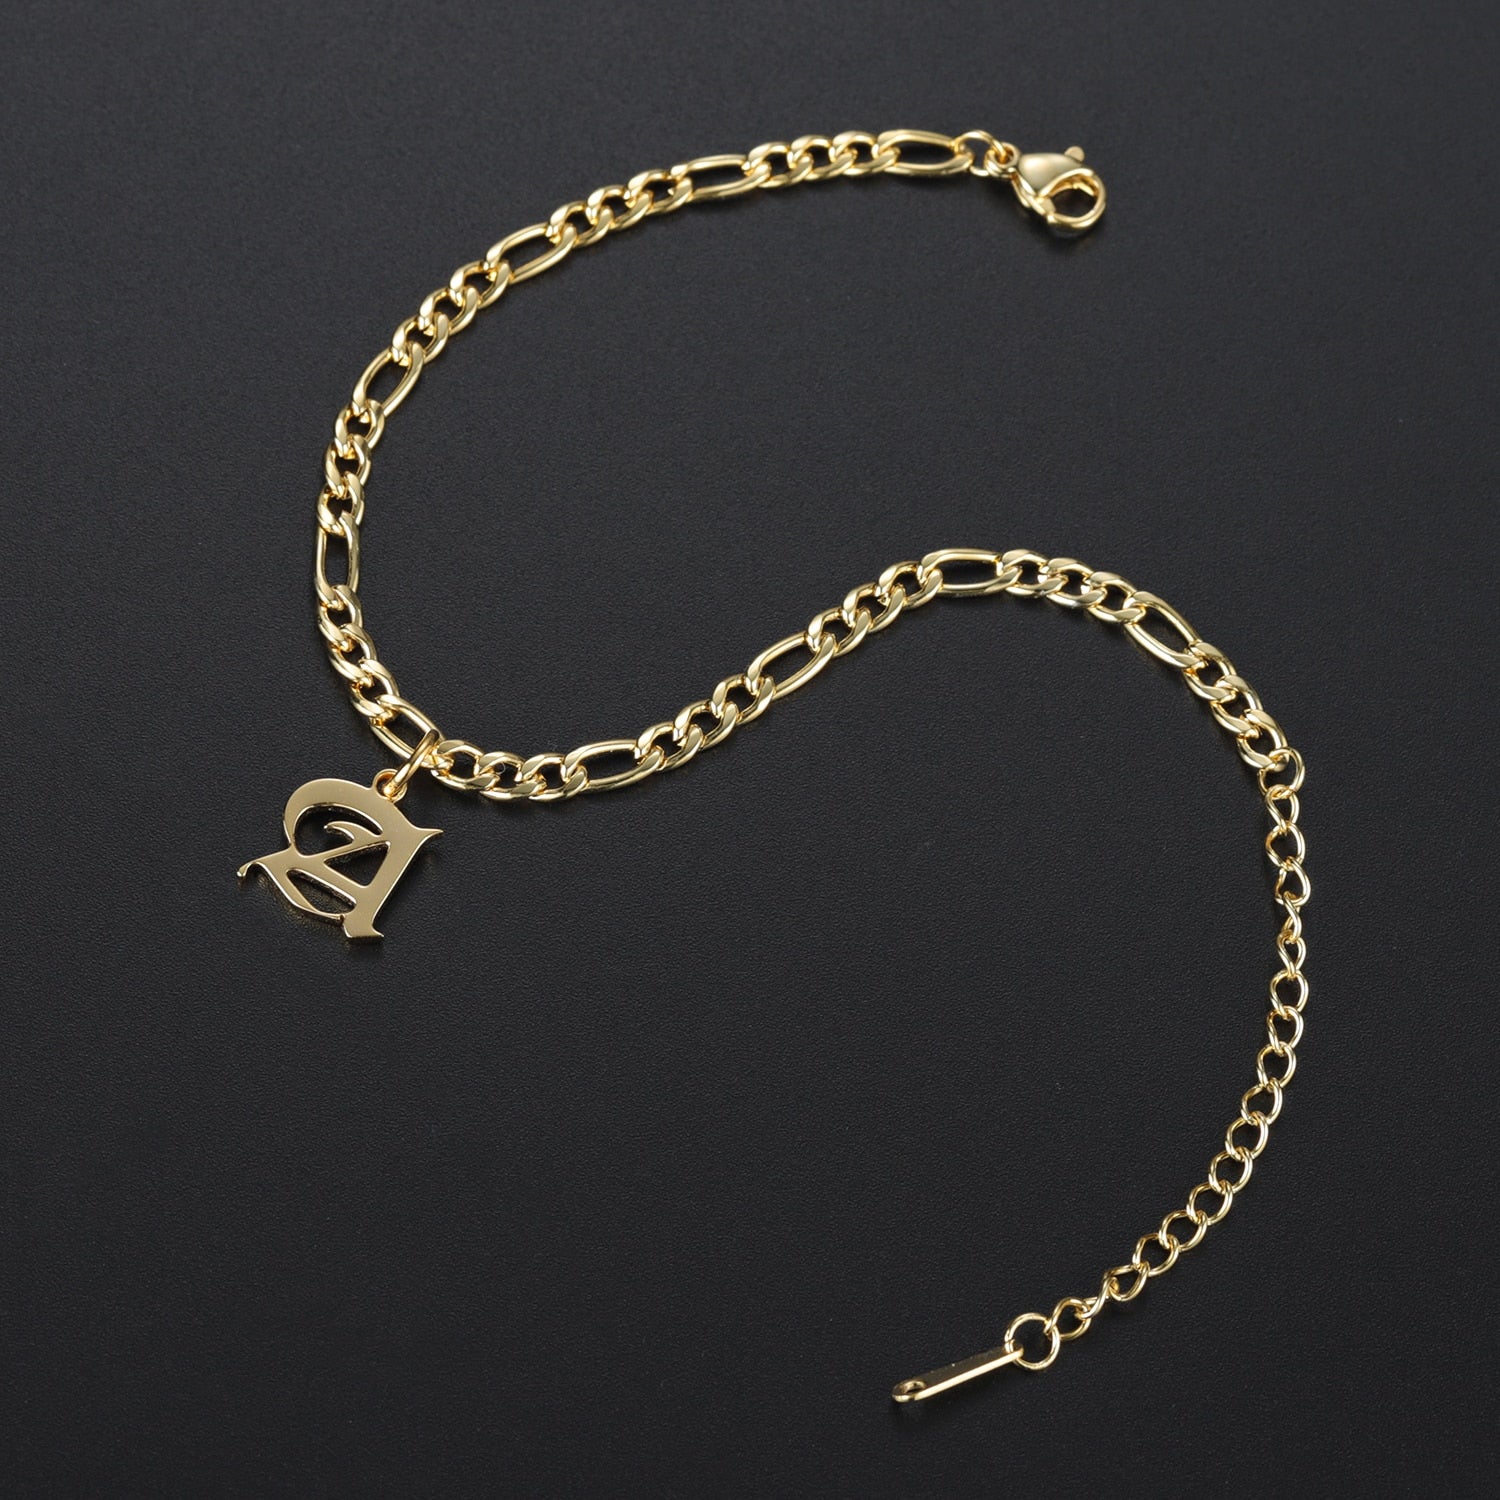 Old English Initial Bracelet - Limitless Jewellery